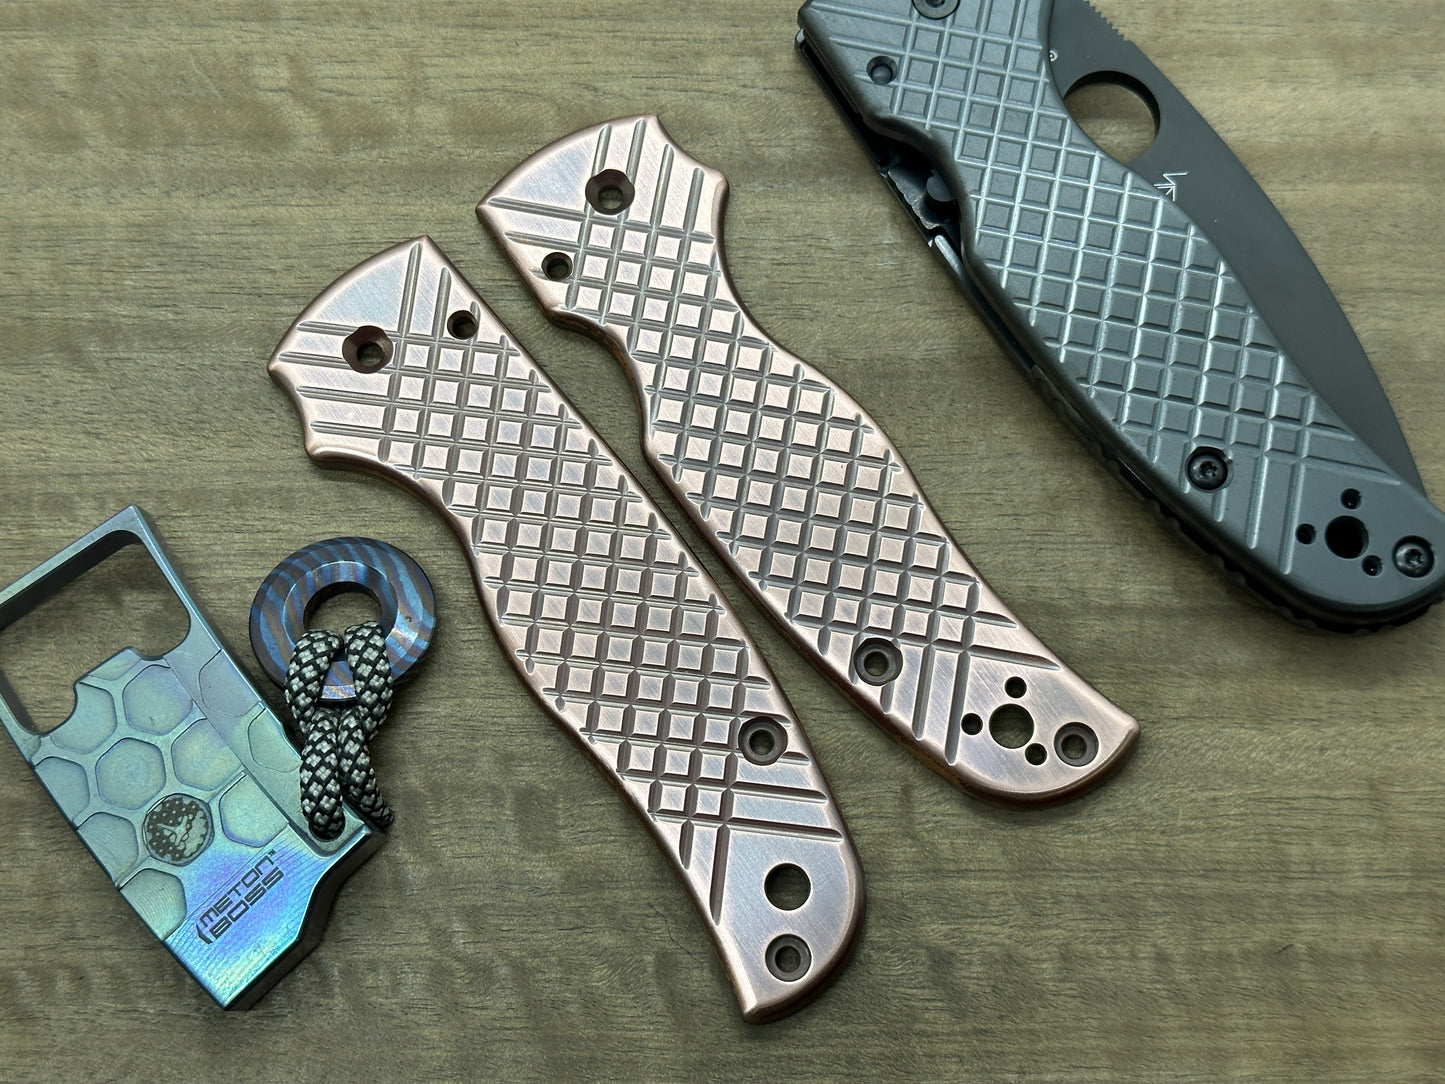 FRAG milled 2-Tone Dark & Brushed Copper Scales for SHAMAN Spyderco